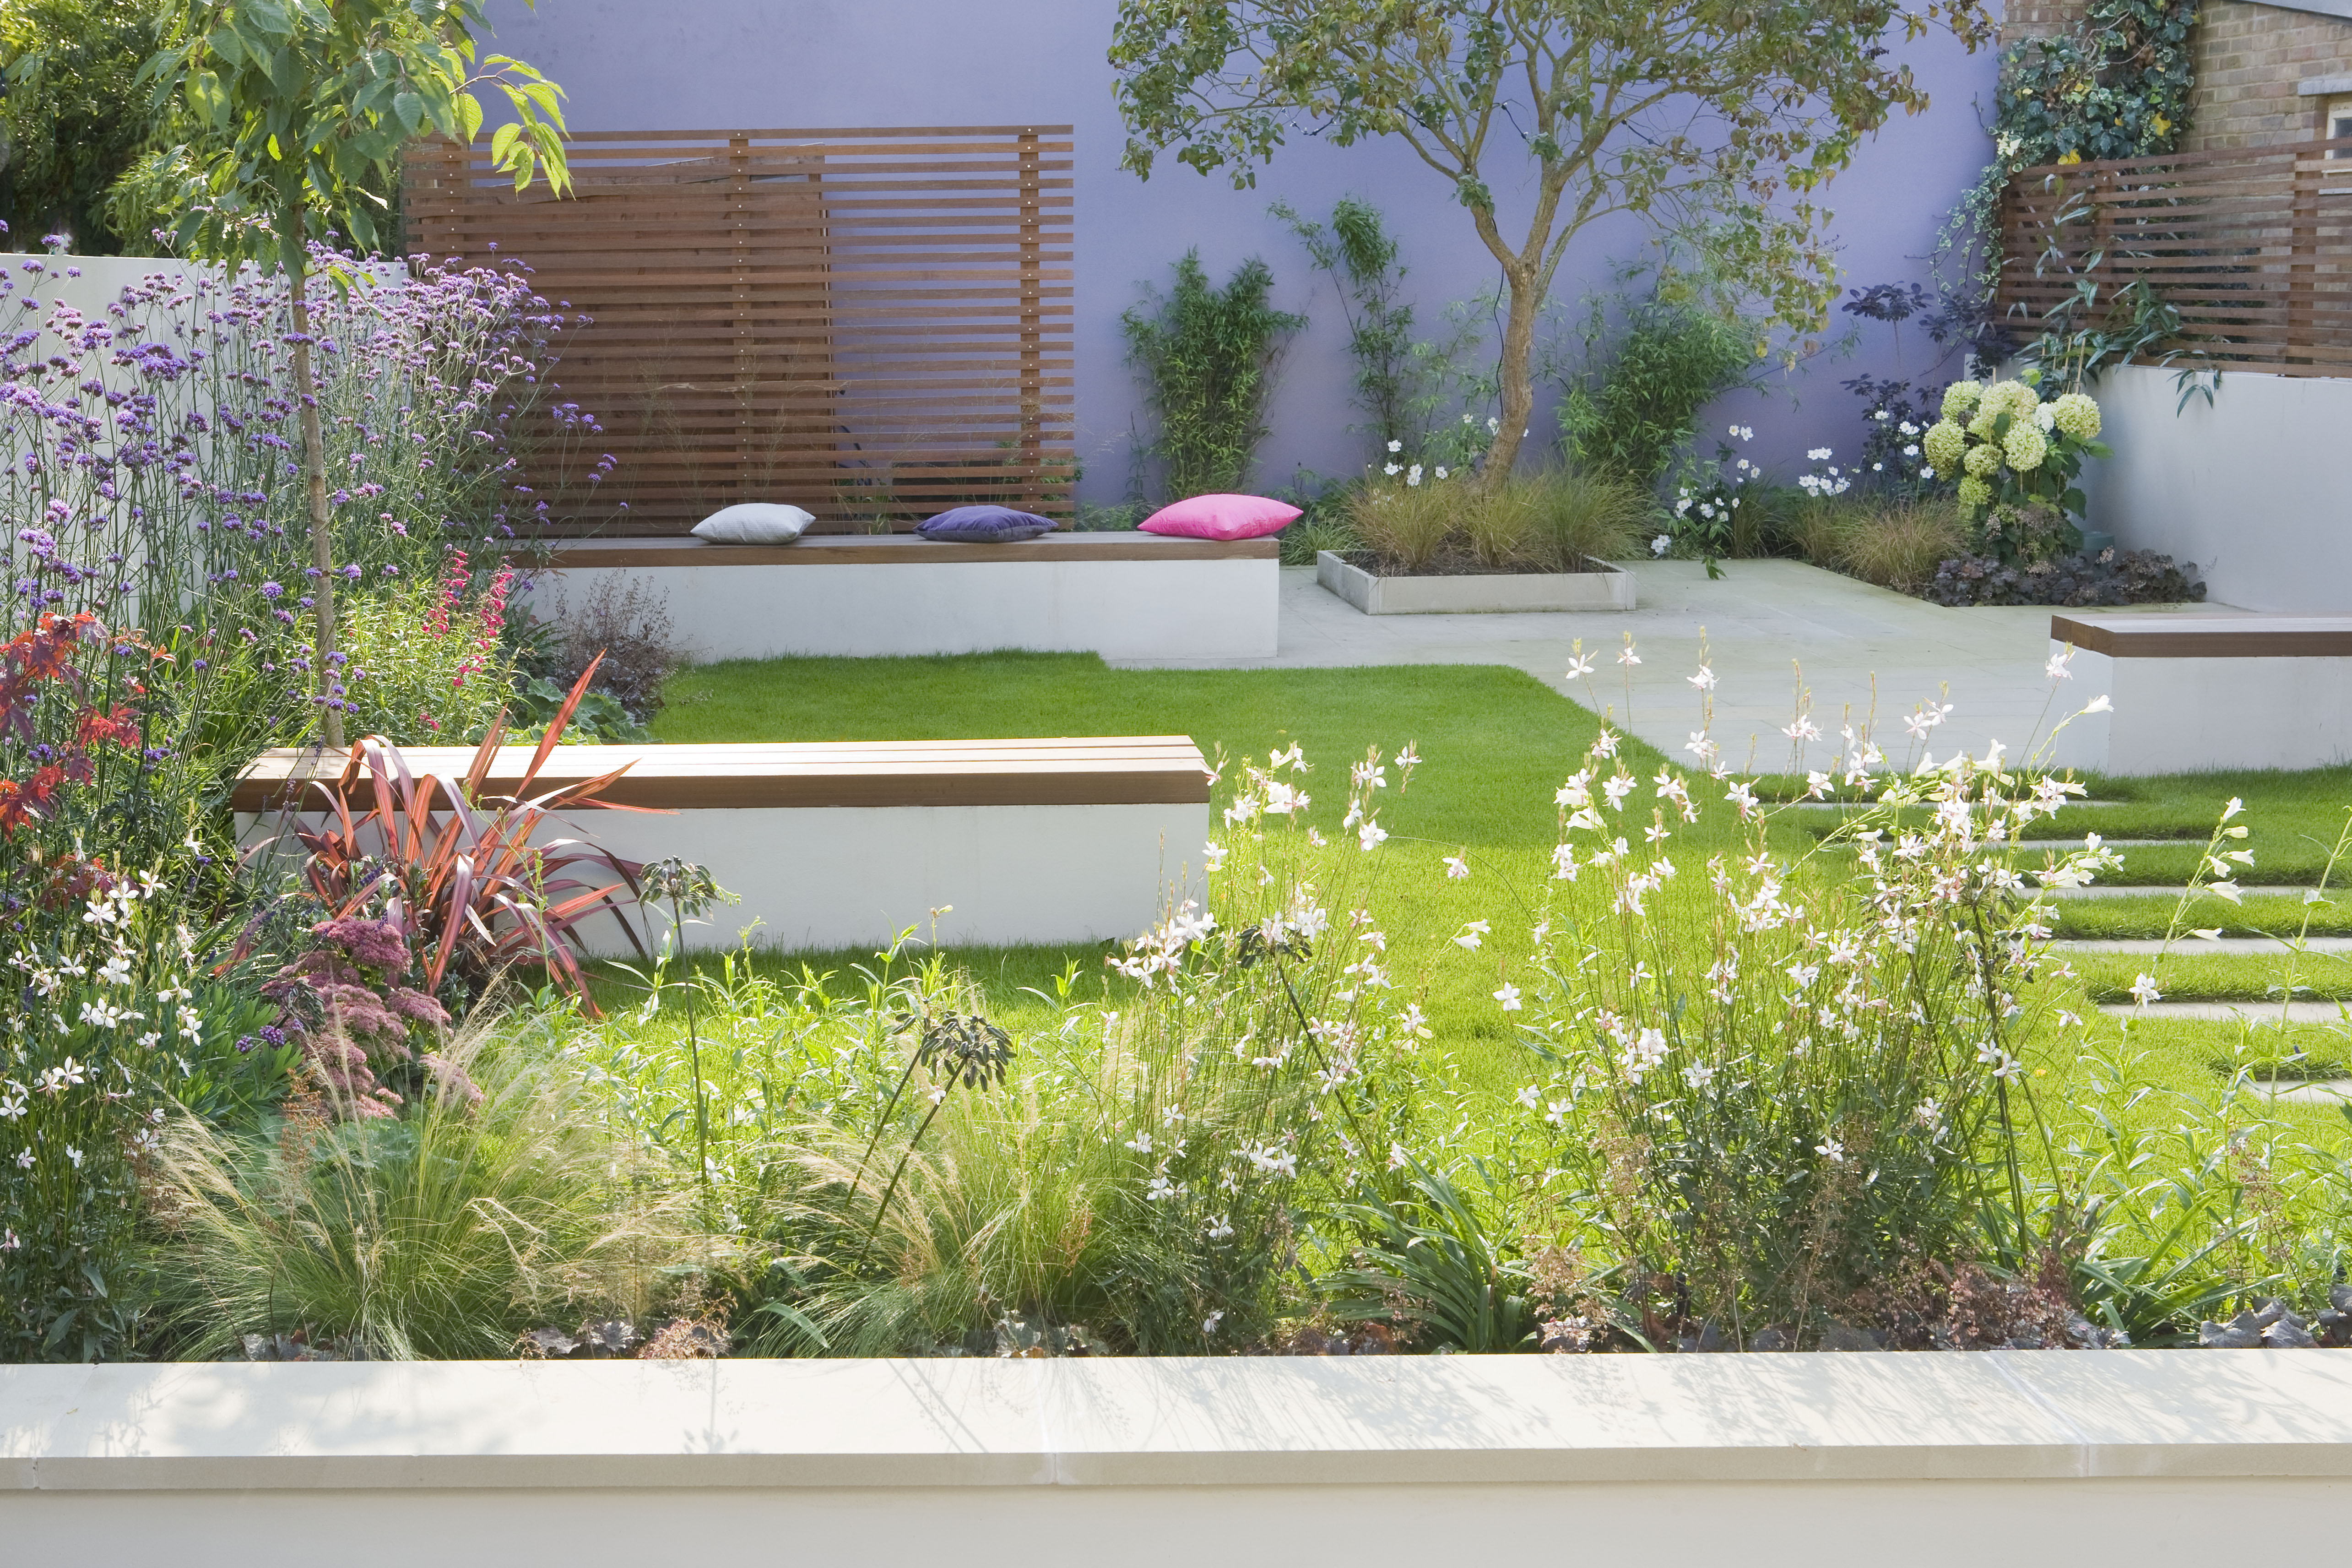 </p> <p>Find your ideal home design pro on designfor-me.com - get matched and see who's interested in your home project. Click image to see more inspiration from our design pros</p> <p>Design by Sara Jane, garden designer from Camden, London</p> <p> #gardendesign #gardeninspiration #gardenlove #gardenideas #gardens </p> <p>